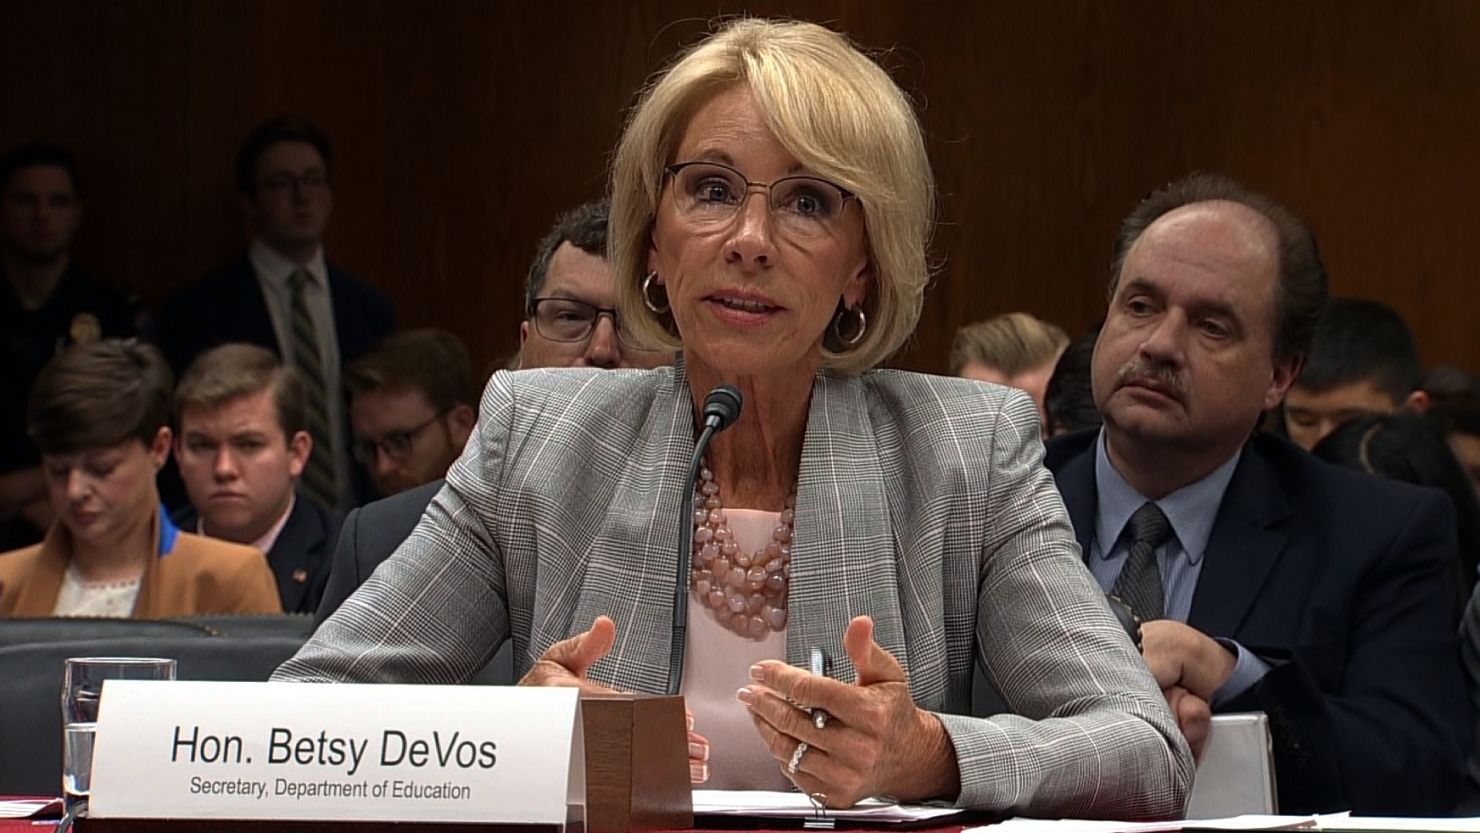 Senate Appropriations Subcmte Hearing on Dept of Ed Budget, Betsy DeVos Testifies 